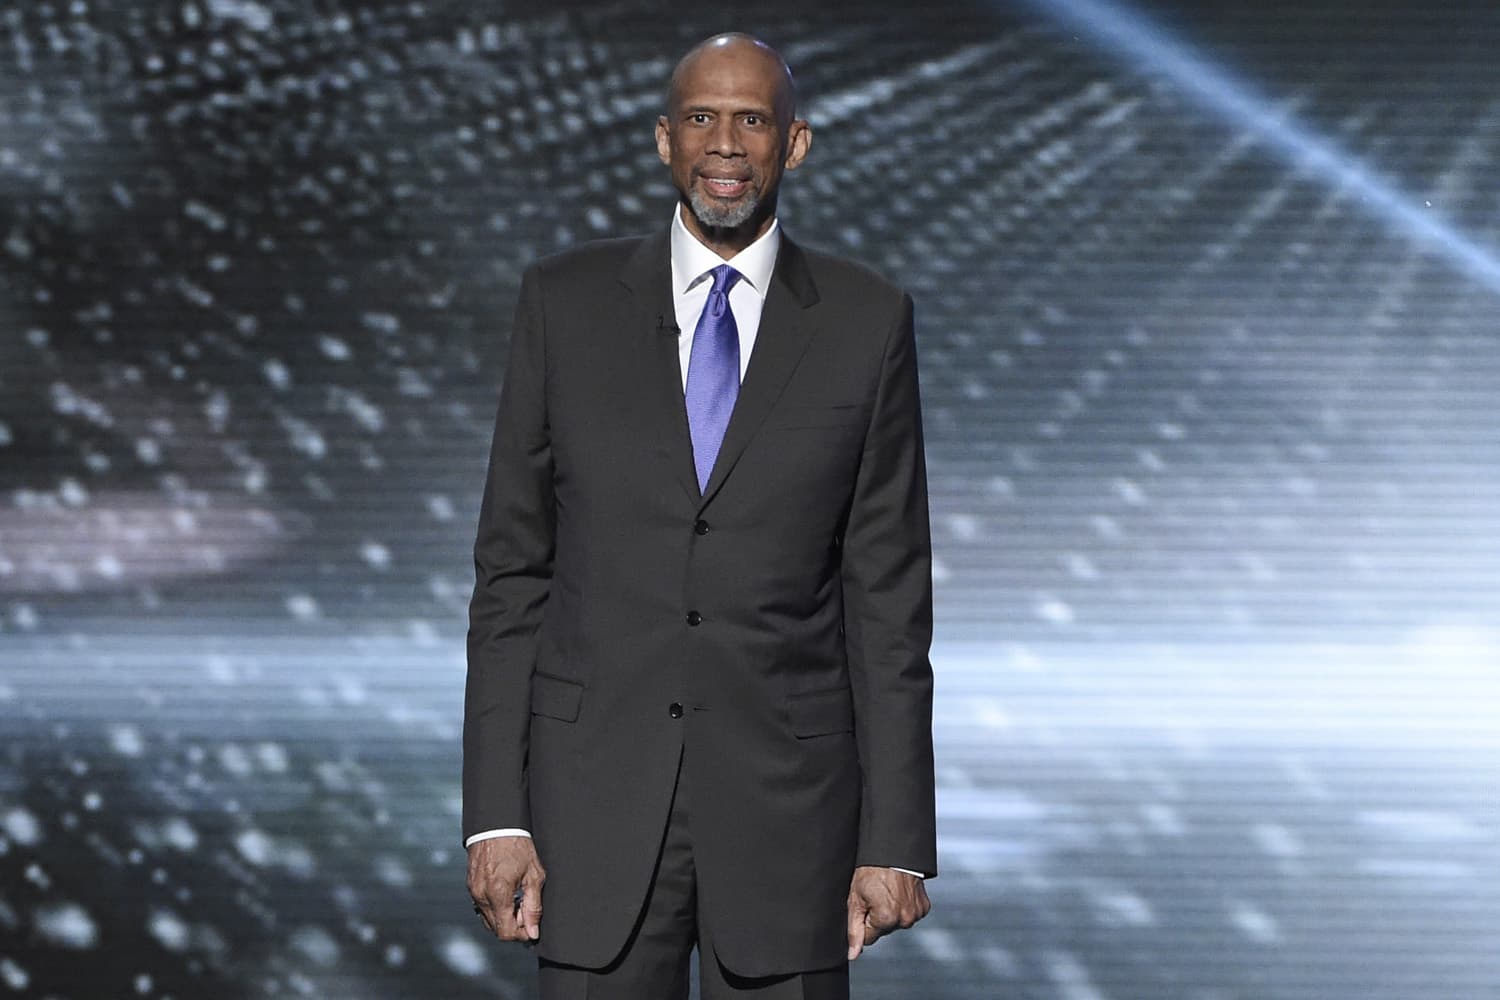 Kareem Abdul-Jabbar presents a tribute to Muhammad Ali at the ESPY Awards at the Microsoft Theater in Los Angeles. (Chris Pizzello/IAP)